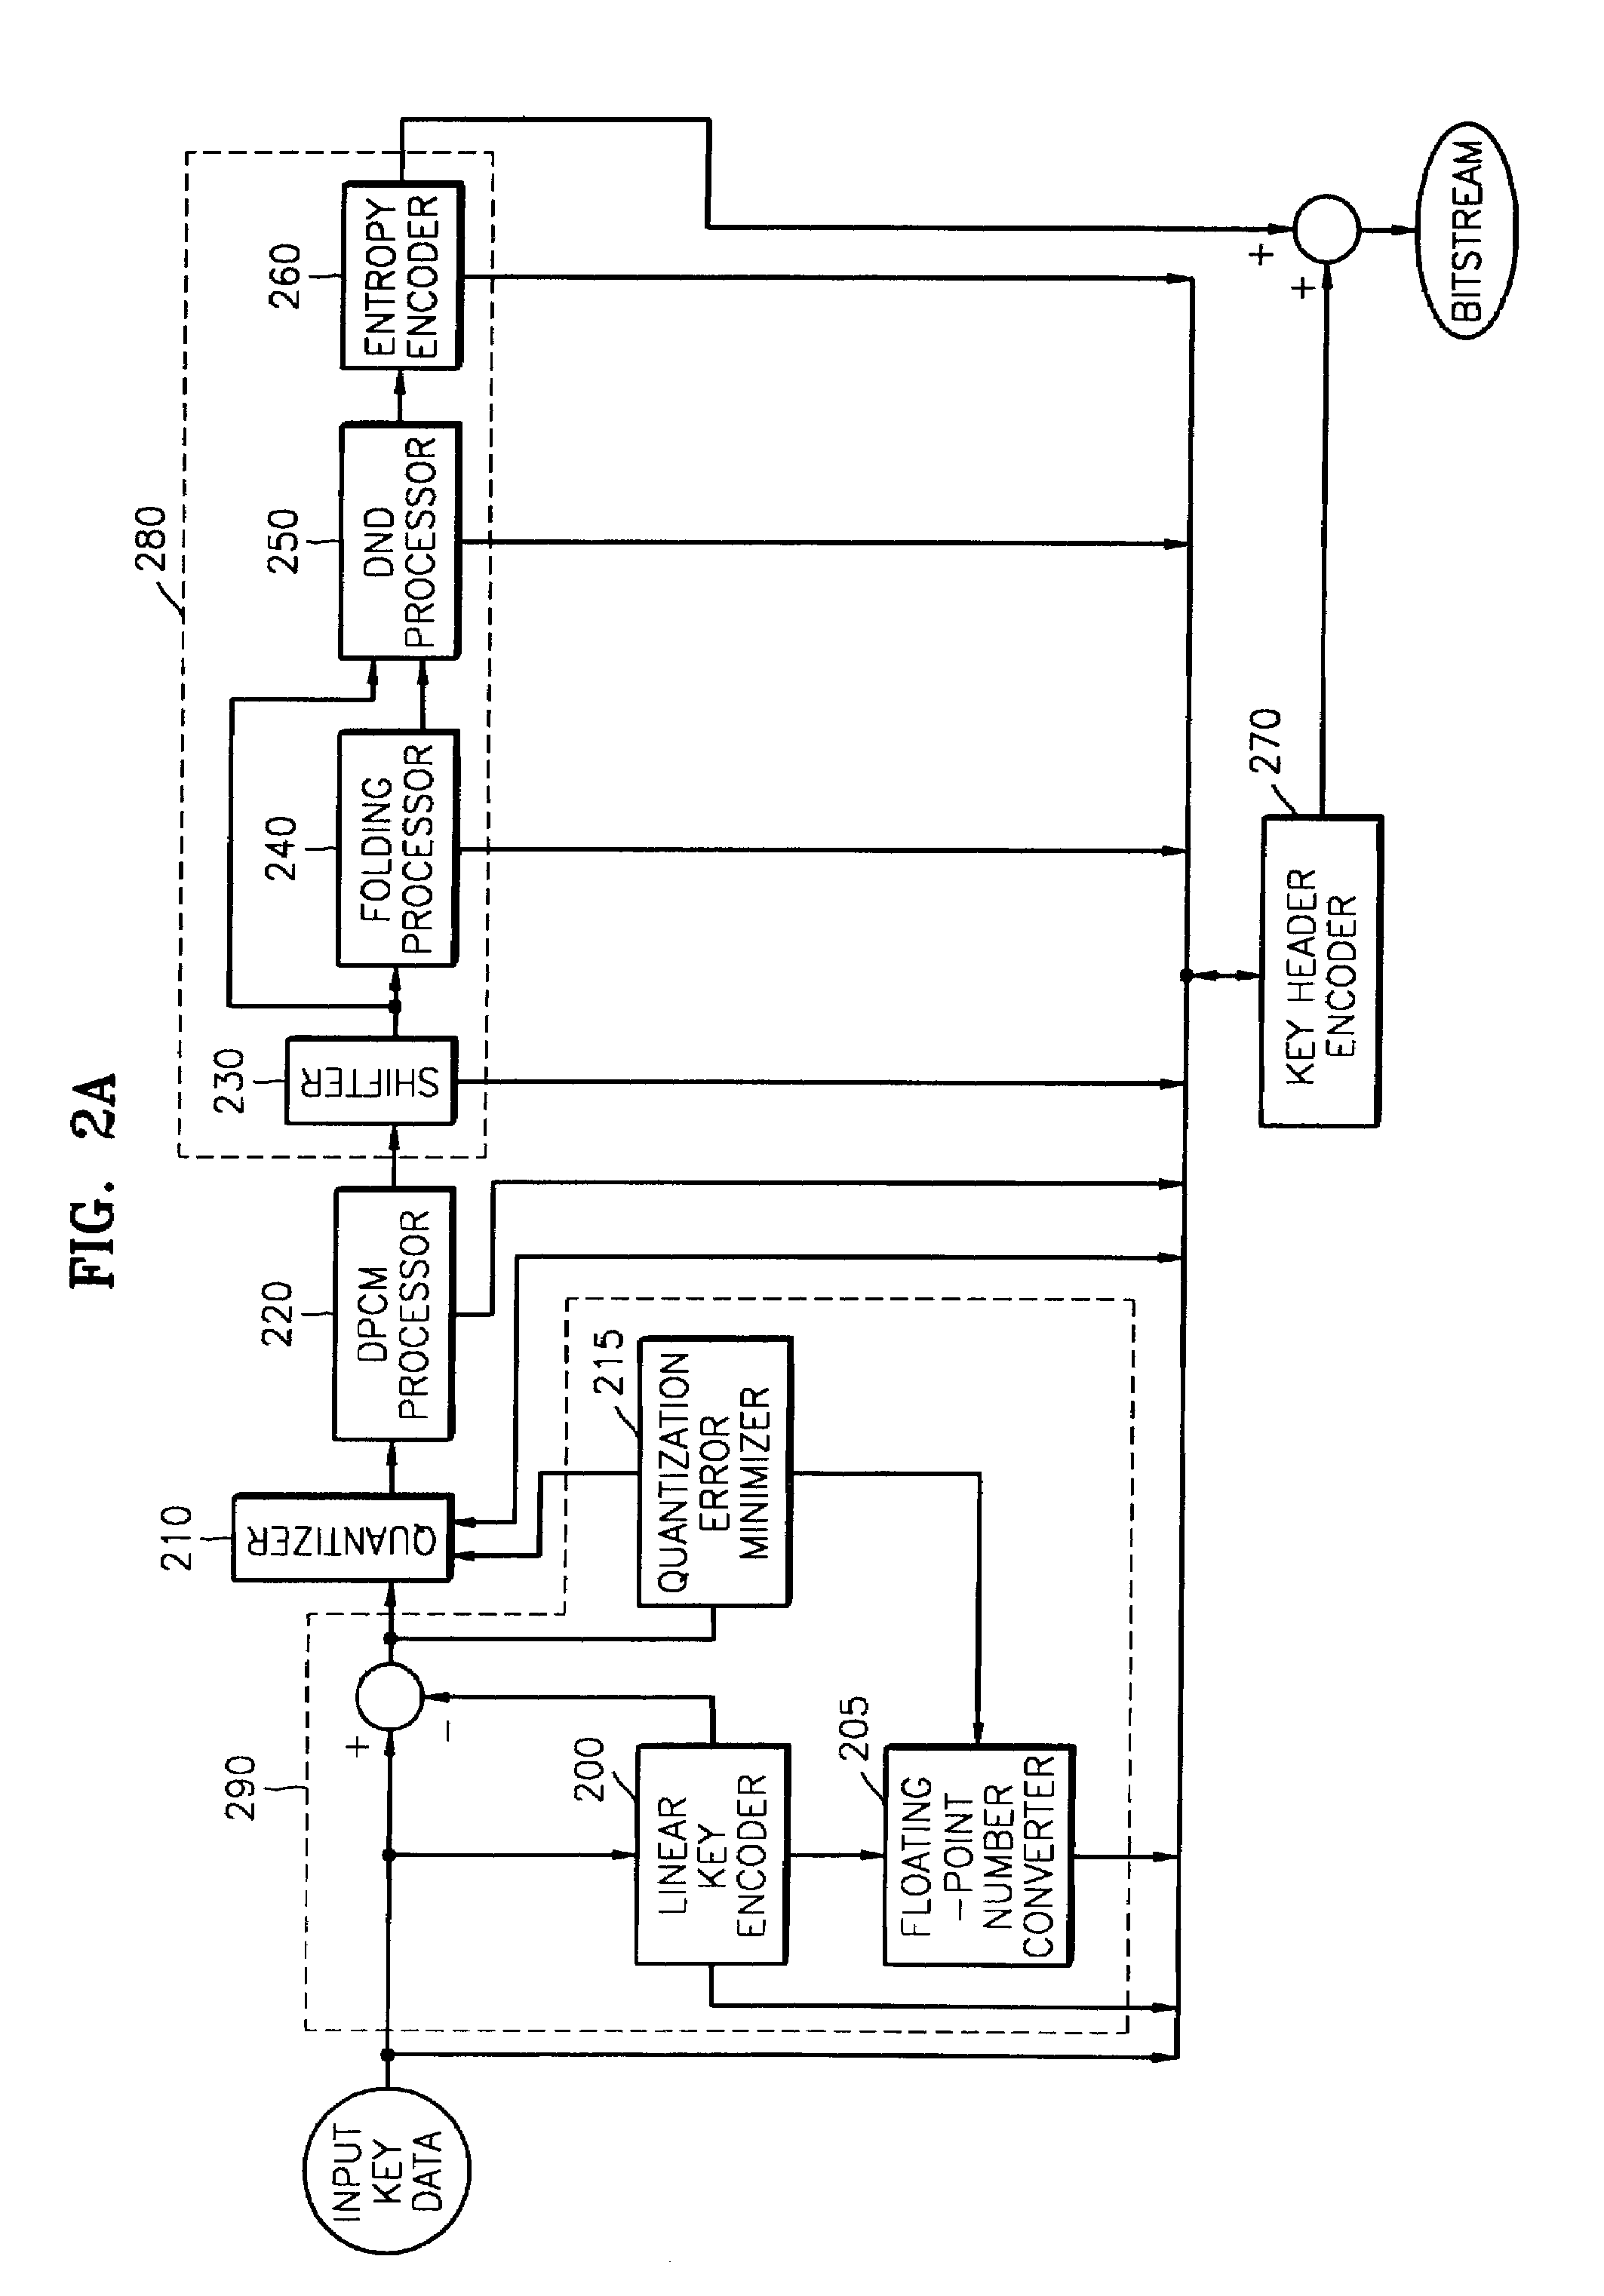 Method and apparatus for encoding and decoding key data